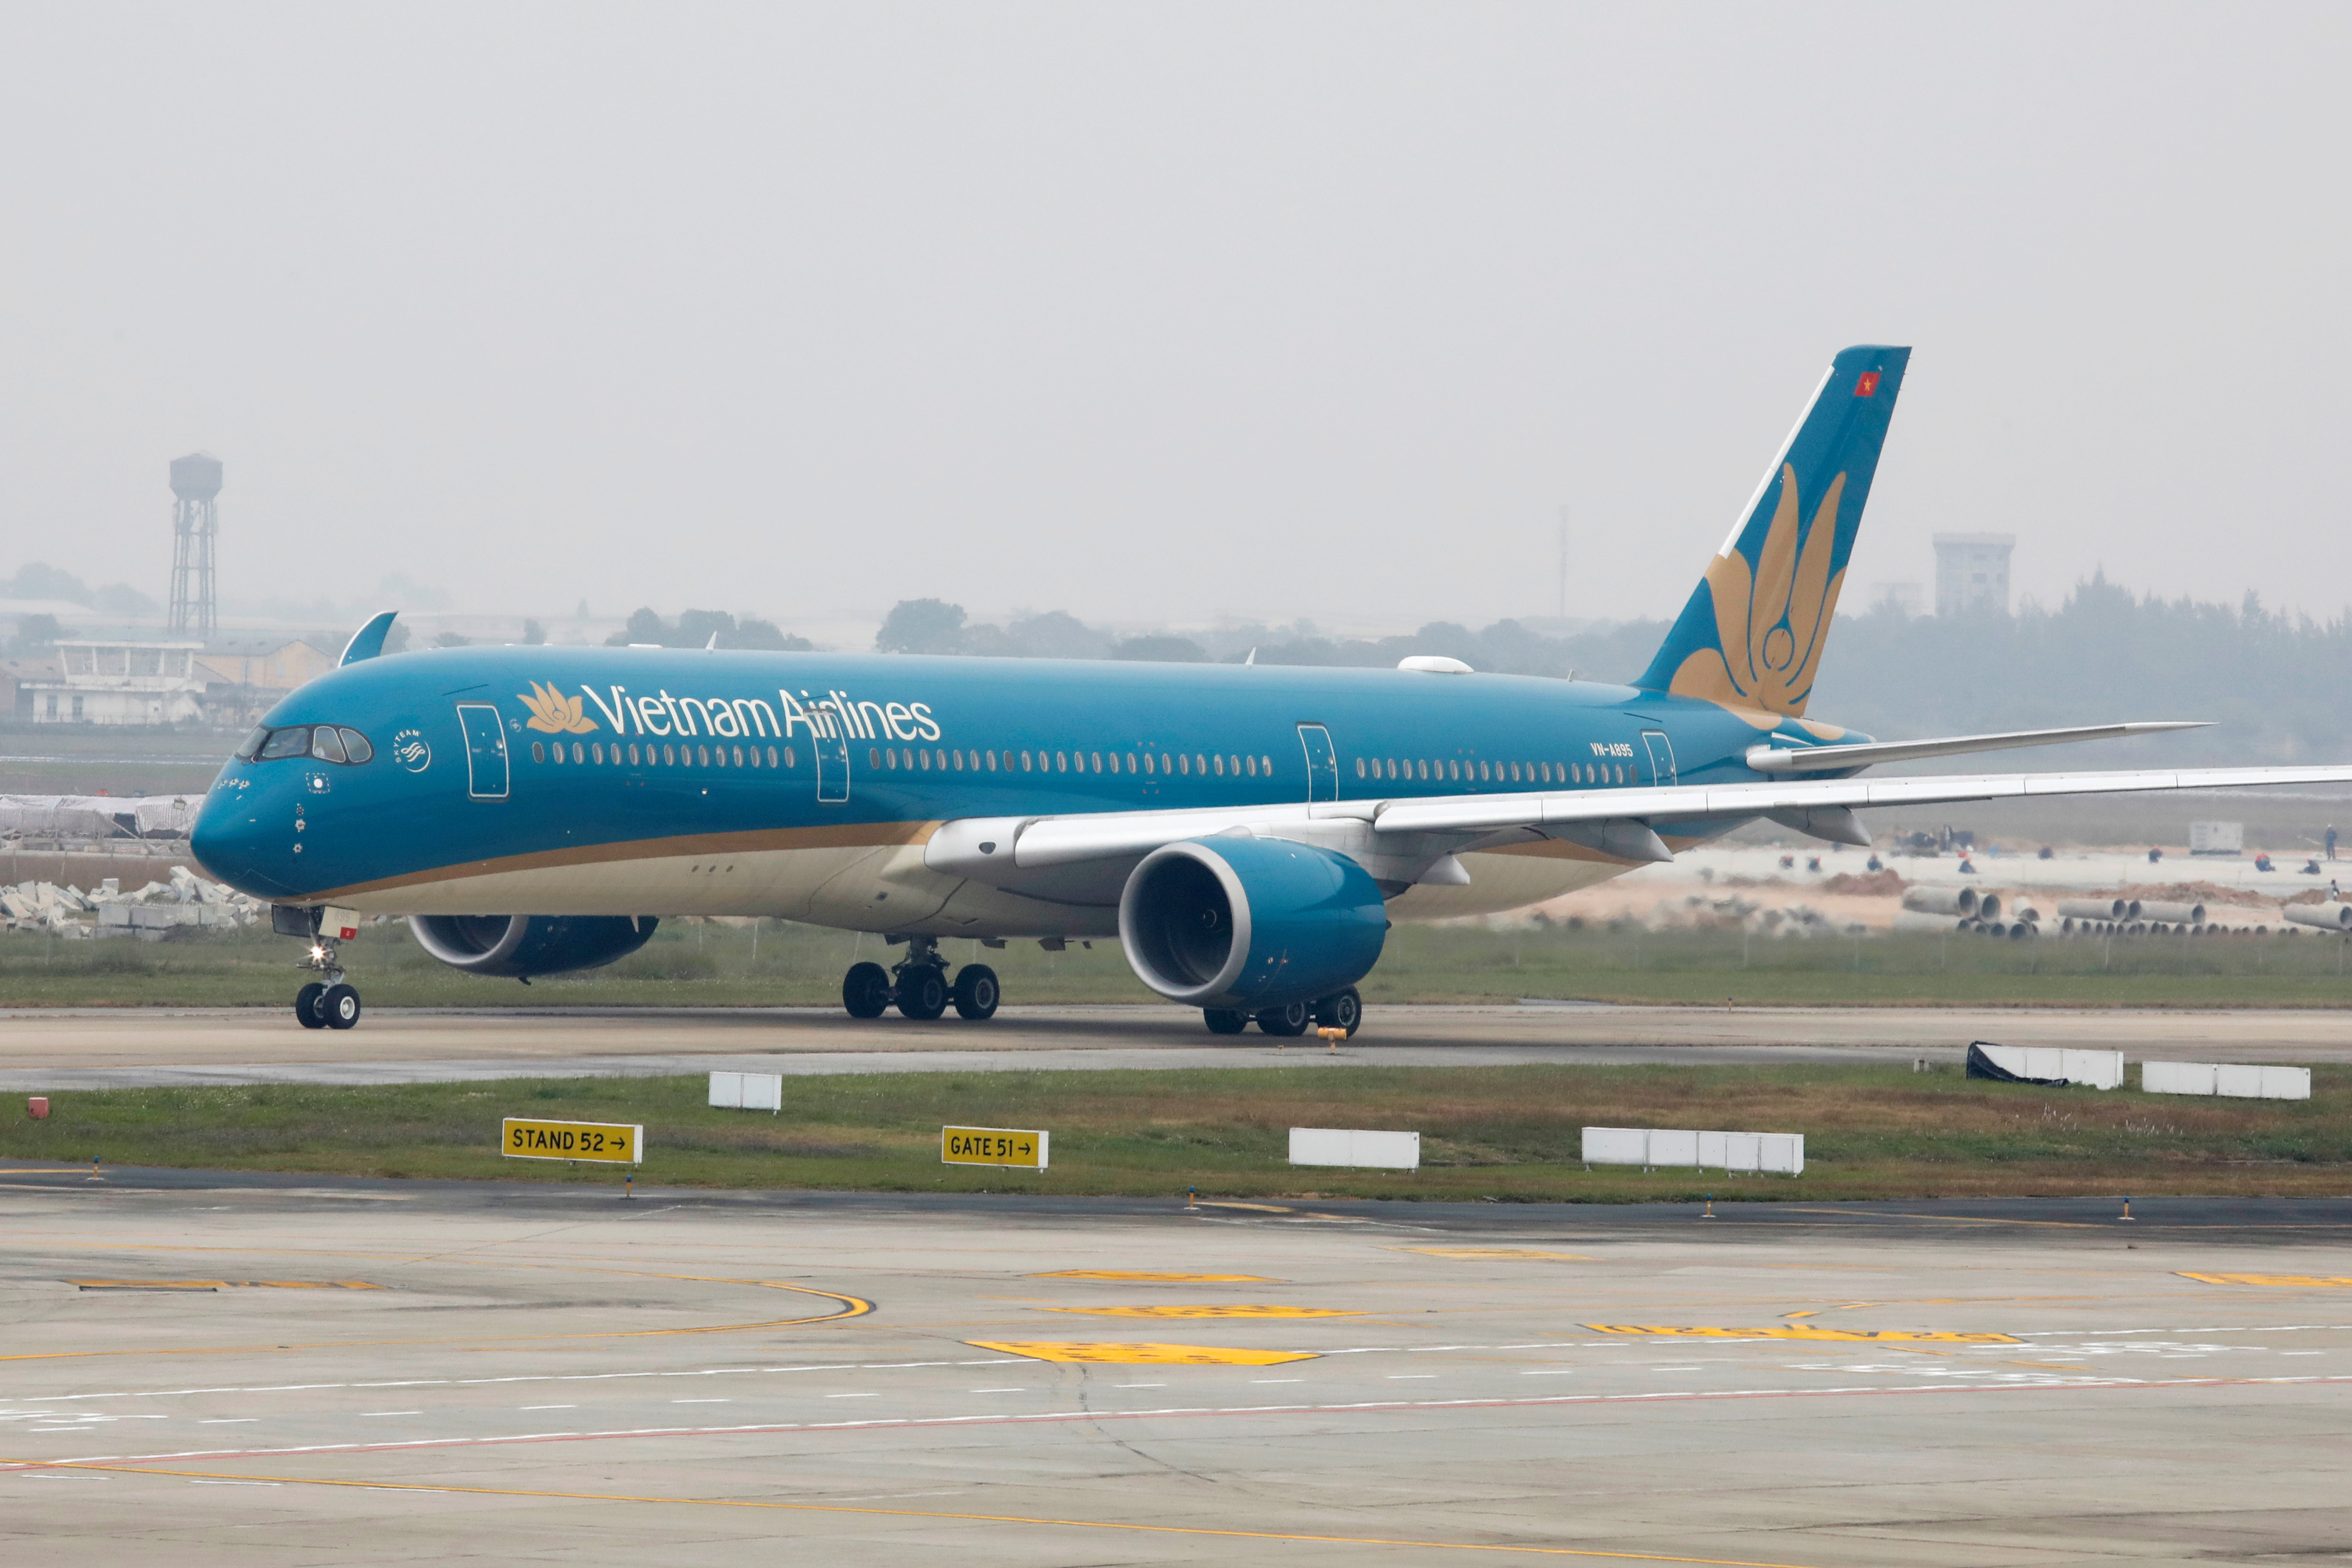 Aircraft of the national flag carrier Vietnam Airlines taxis at Noi Bai airport in Hanoi